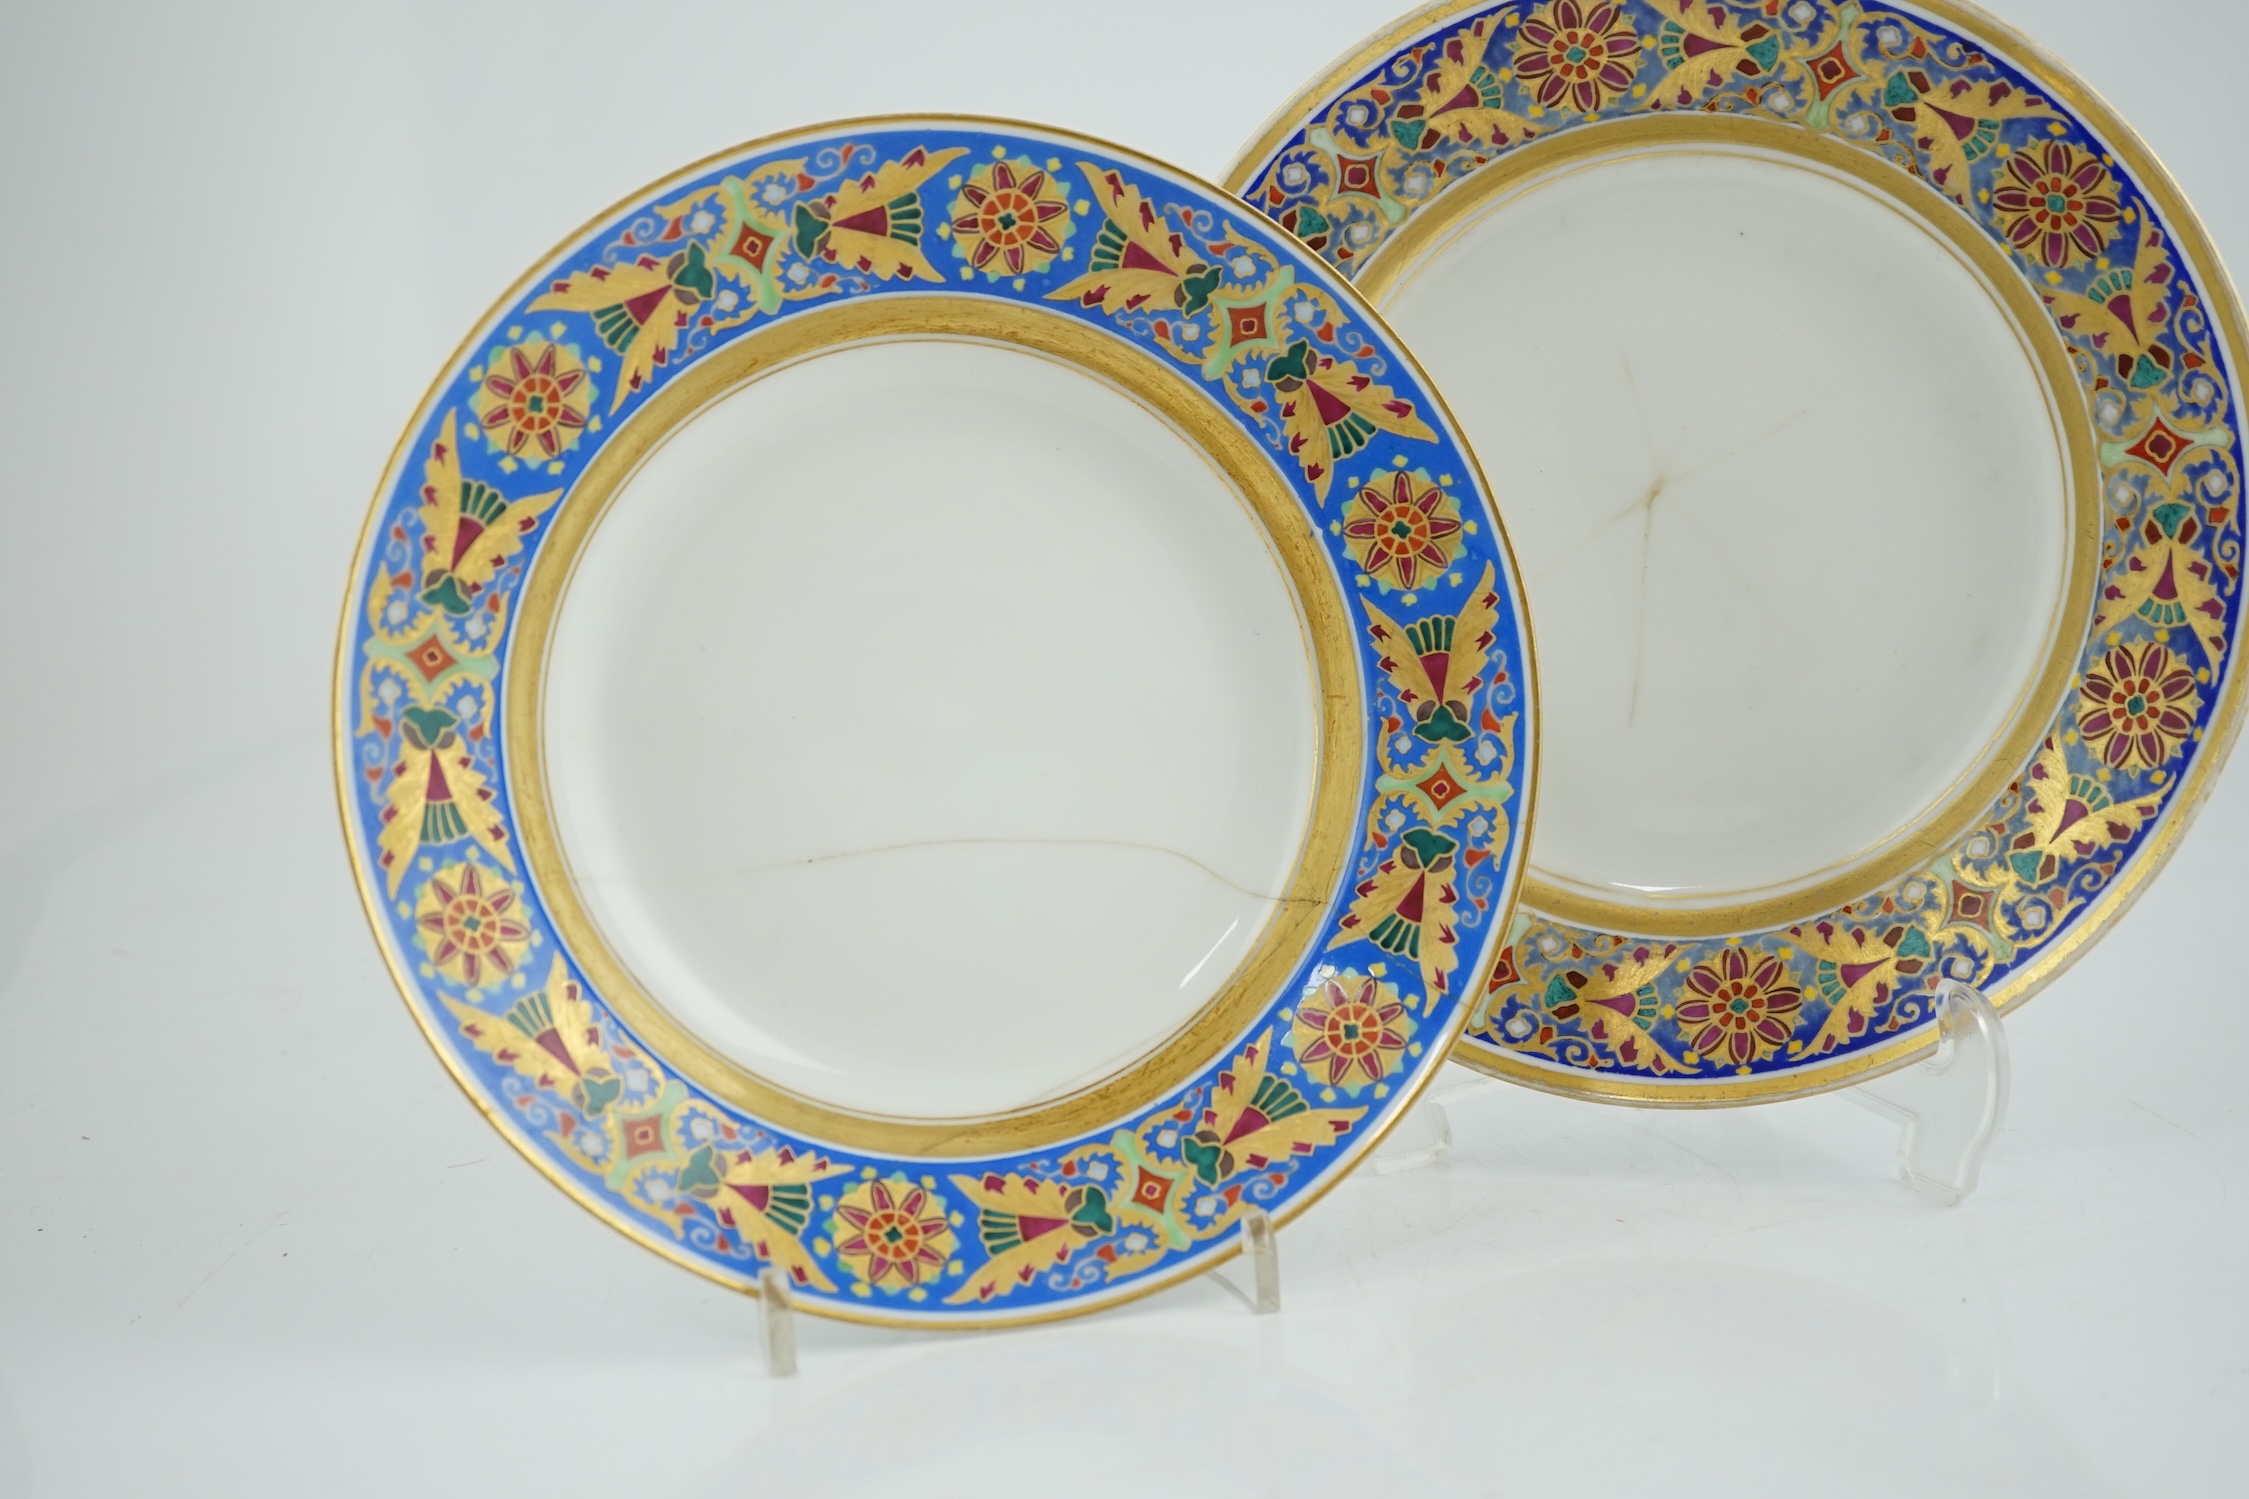 A pair of Nicholas II Imperial porcelain factory plates, from the Gothic service, green printed marks, 23.5cm diameter. Condition - poor to fair repairs